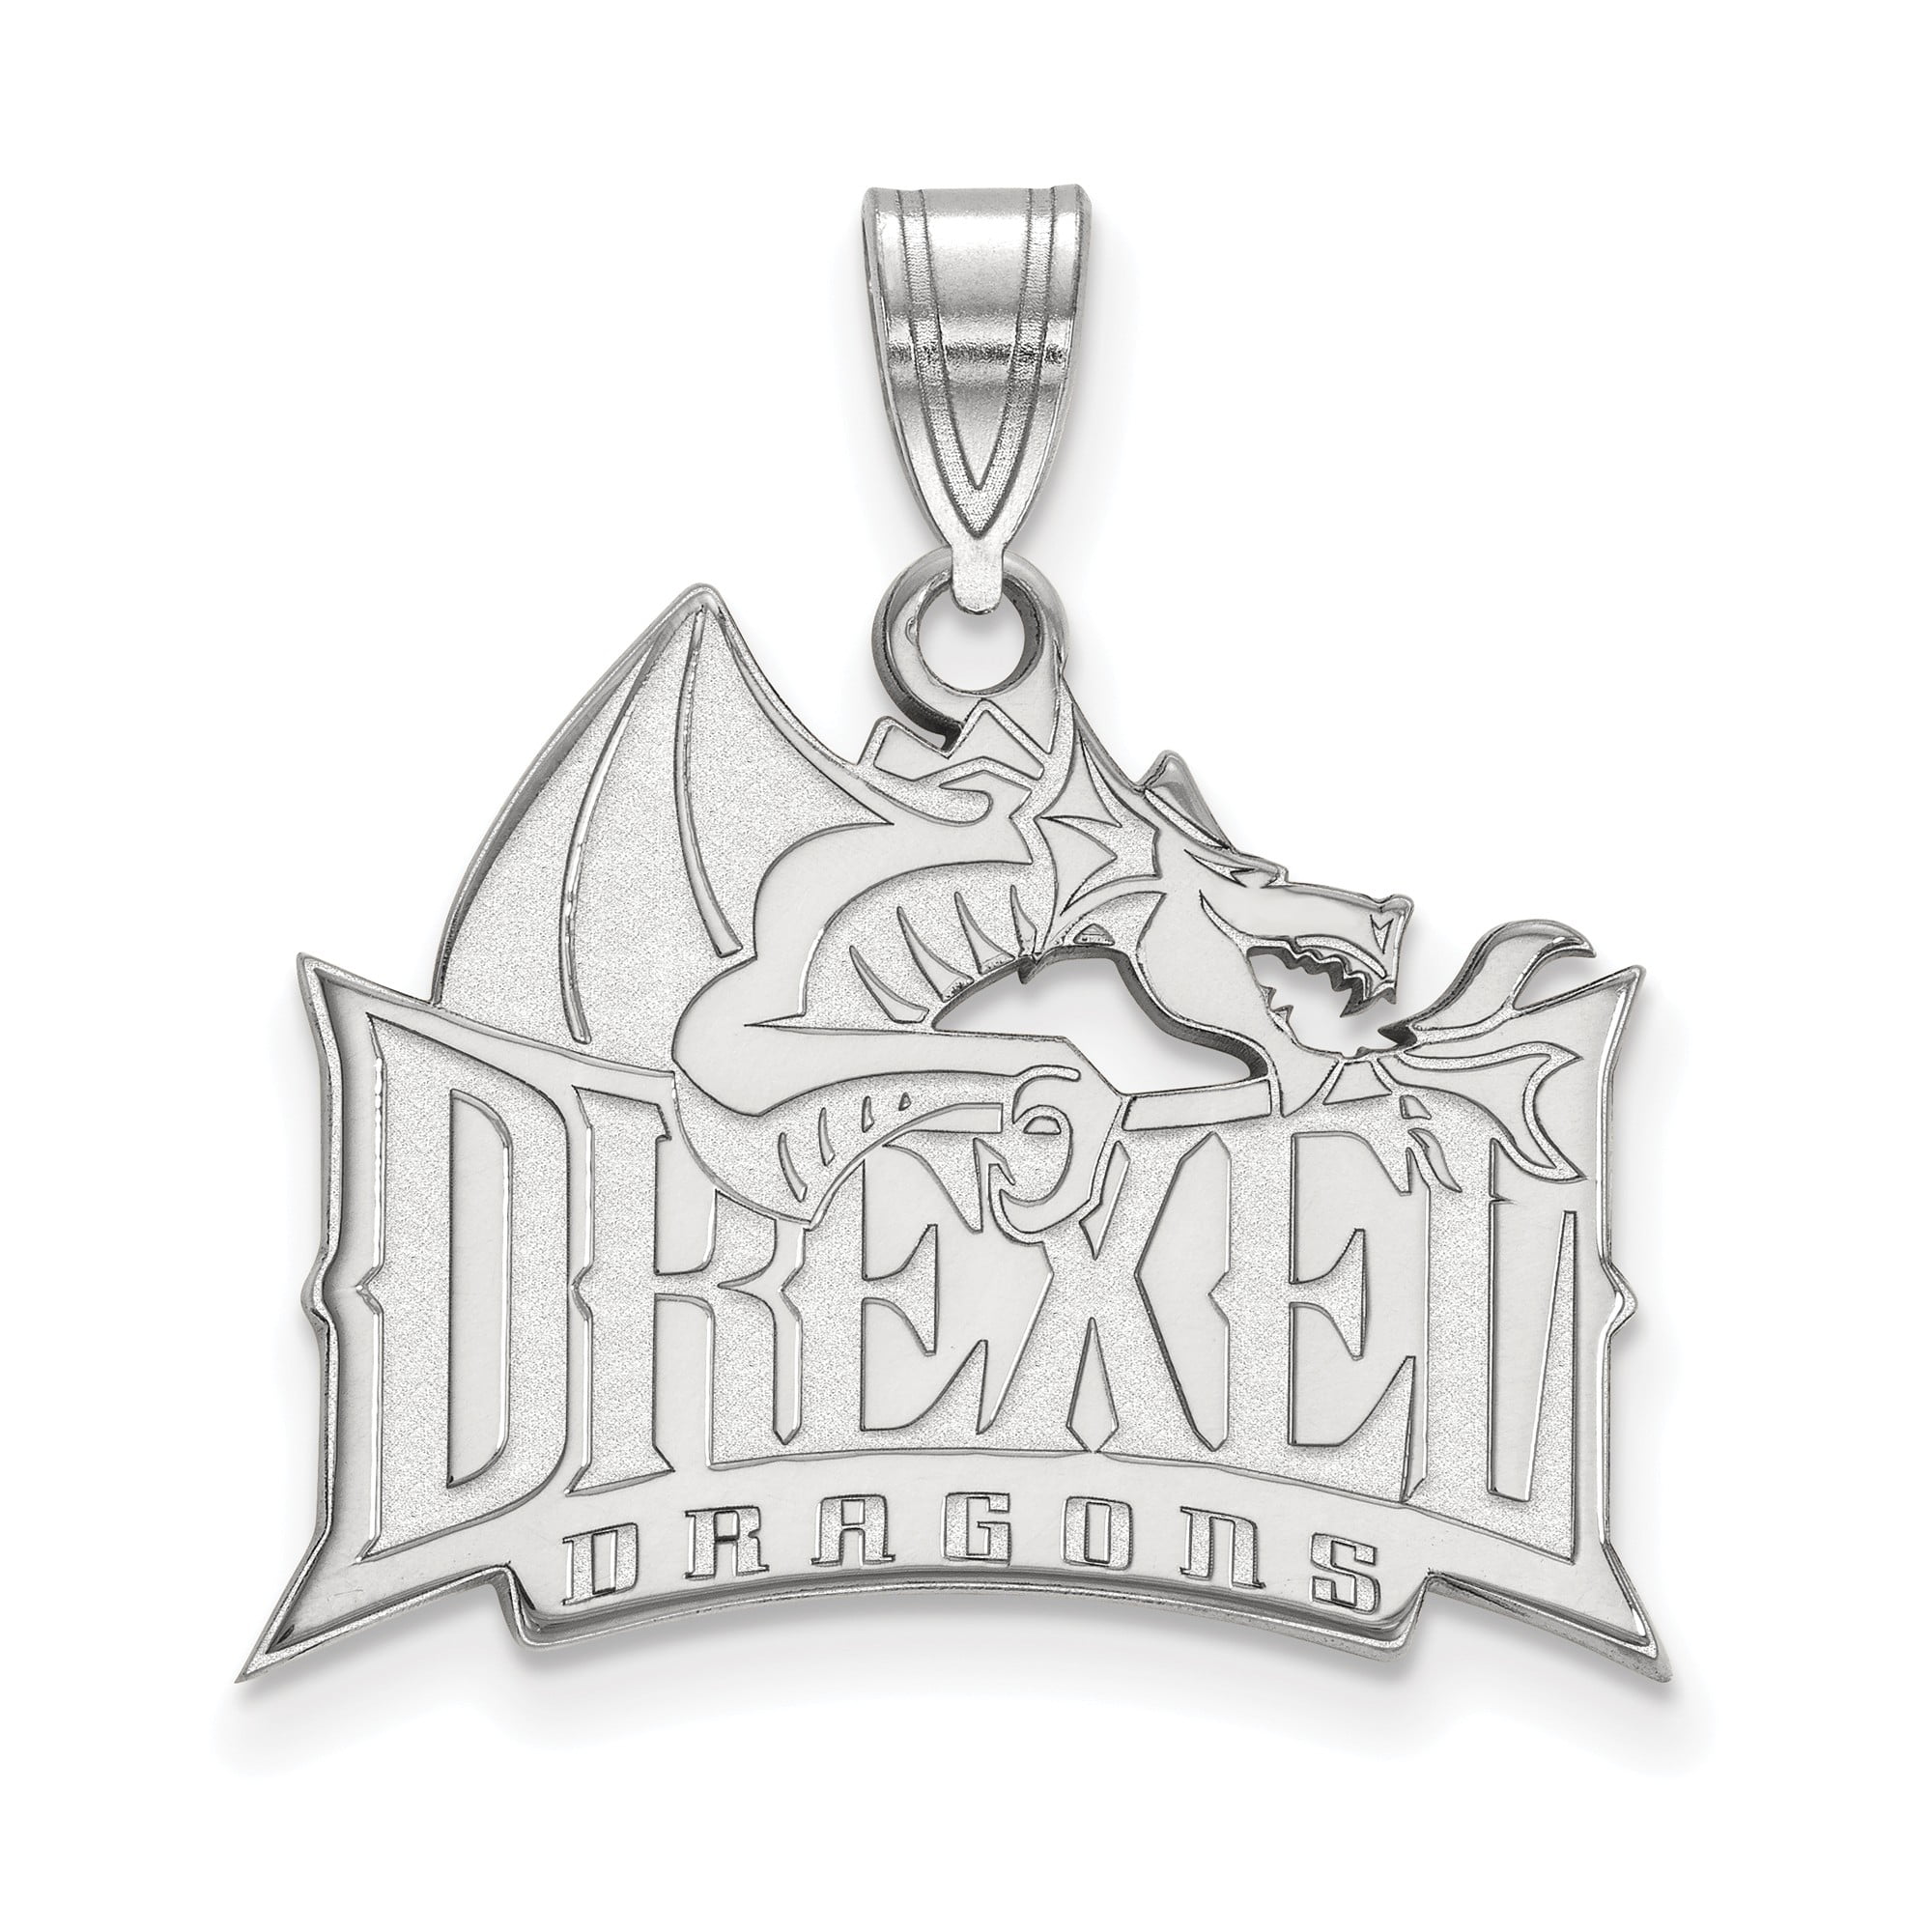 17mm x 15mm Solid 925 Sterling Silver Official Drexel University Small Pendant Charm